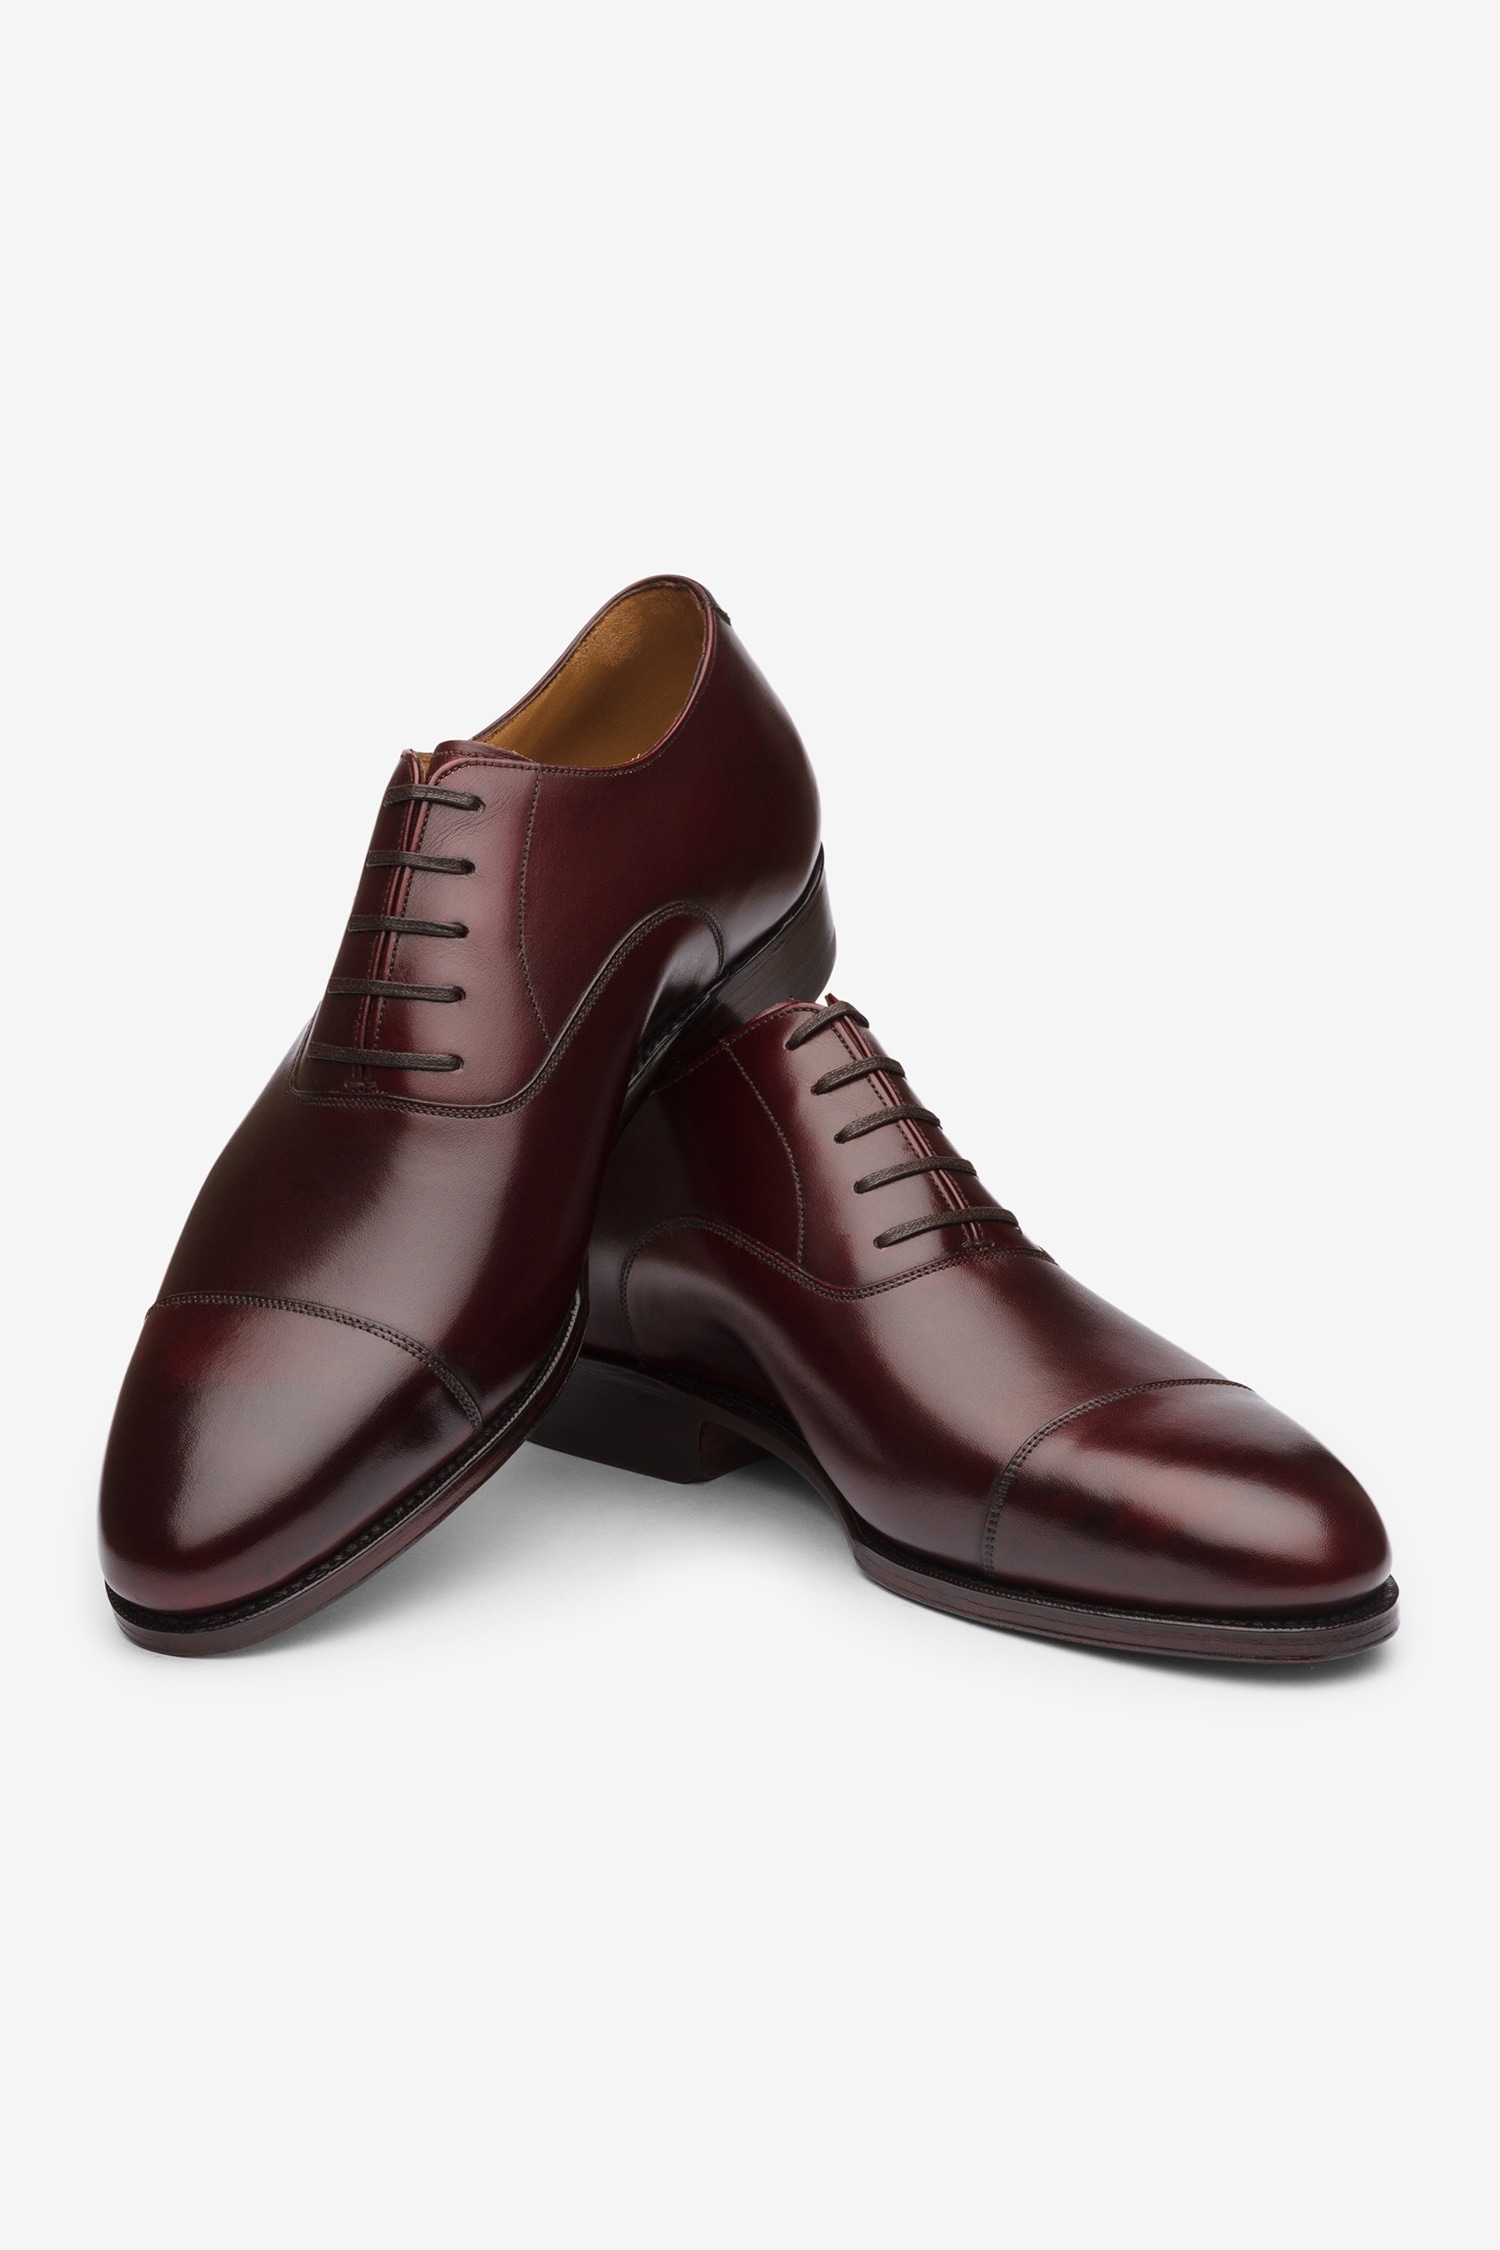 Buy Maroon Straight Tip Oxford Shoes For Men by Bridlen Online at Aza ...